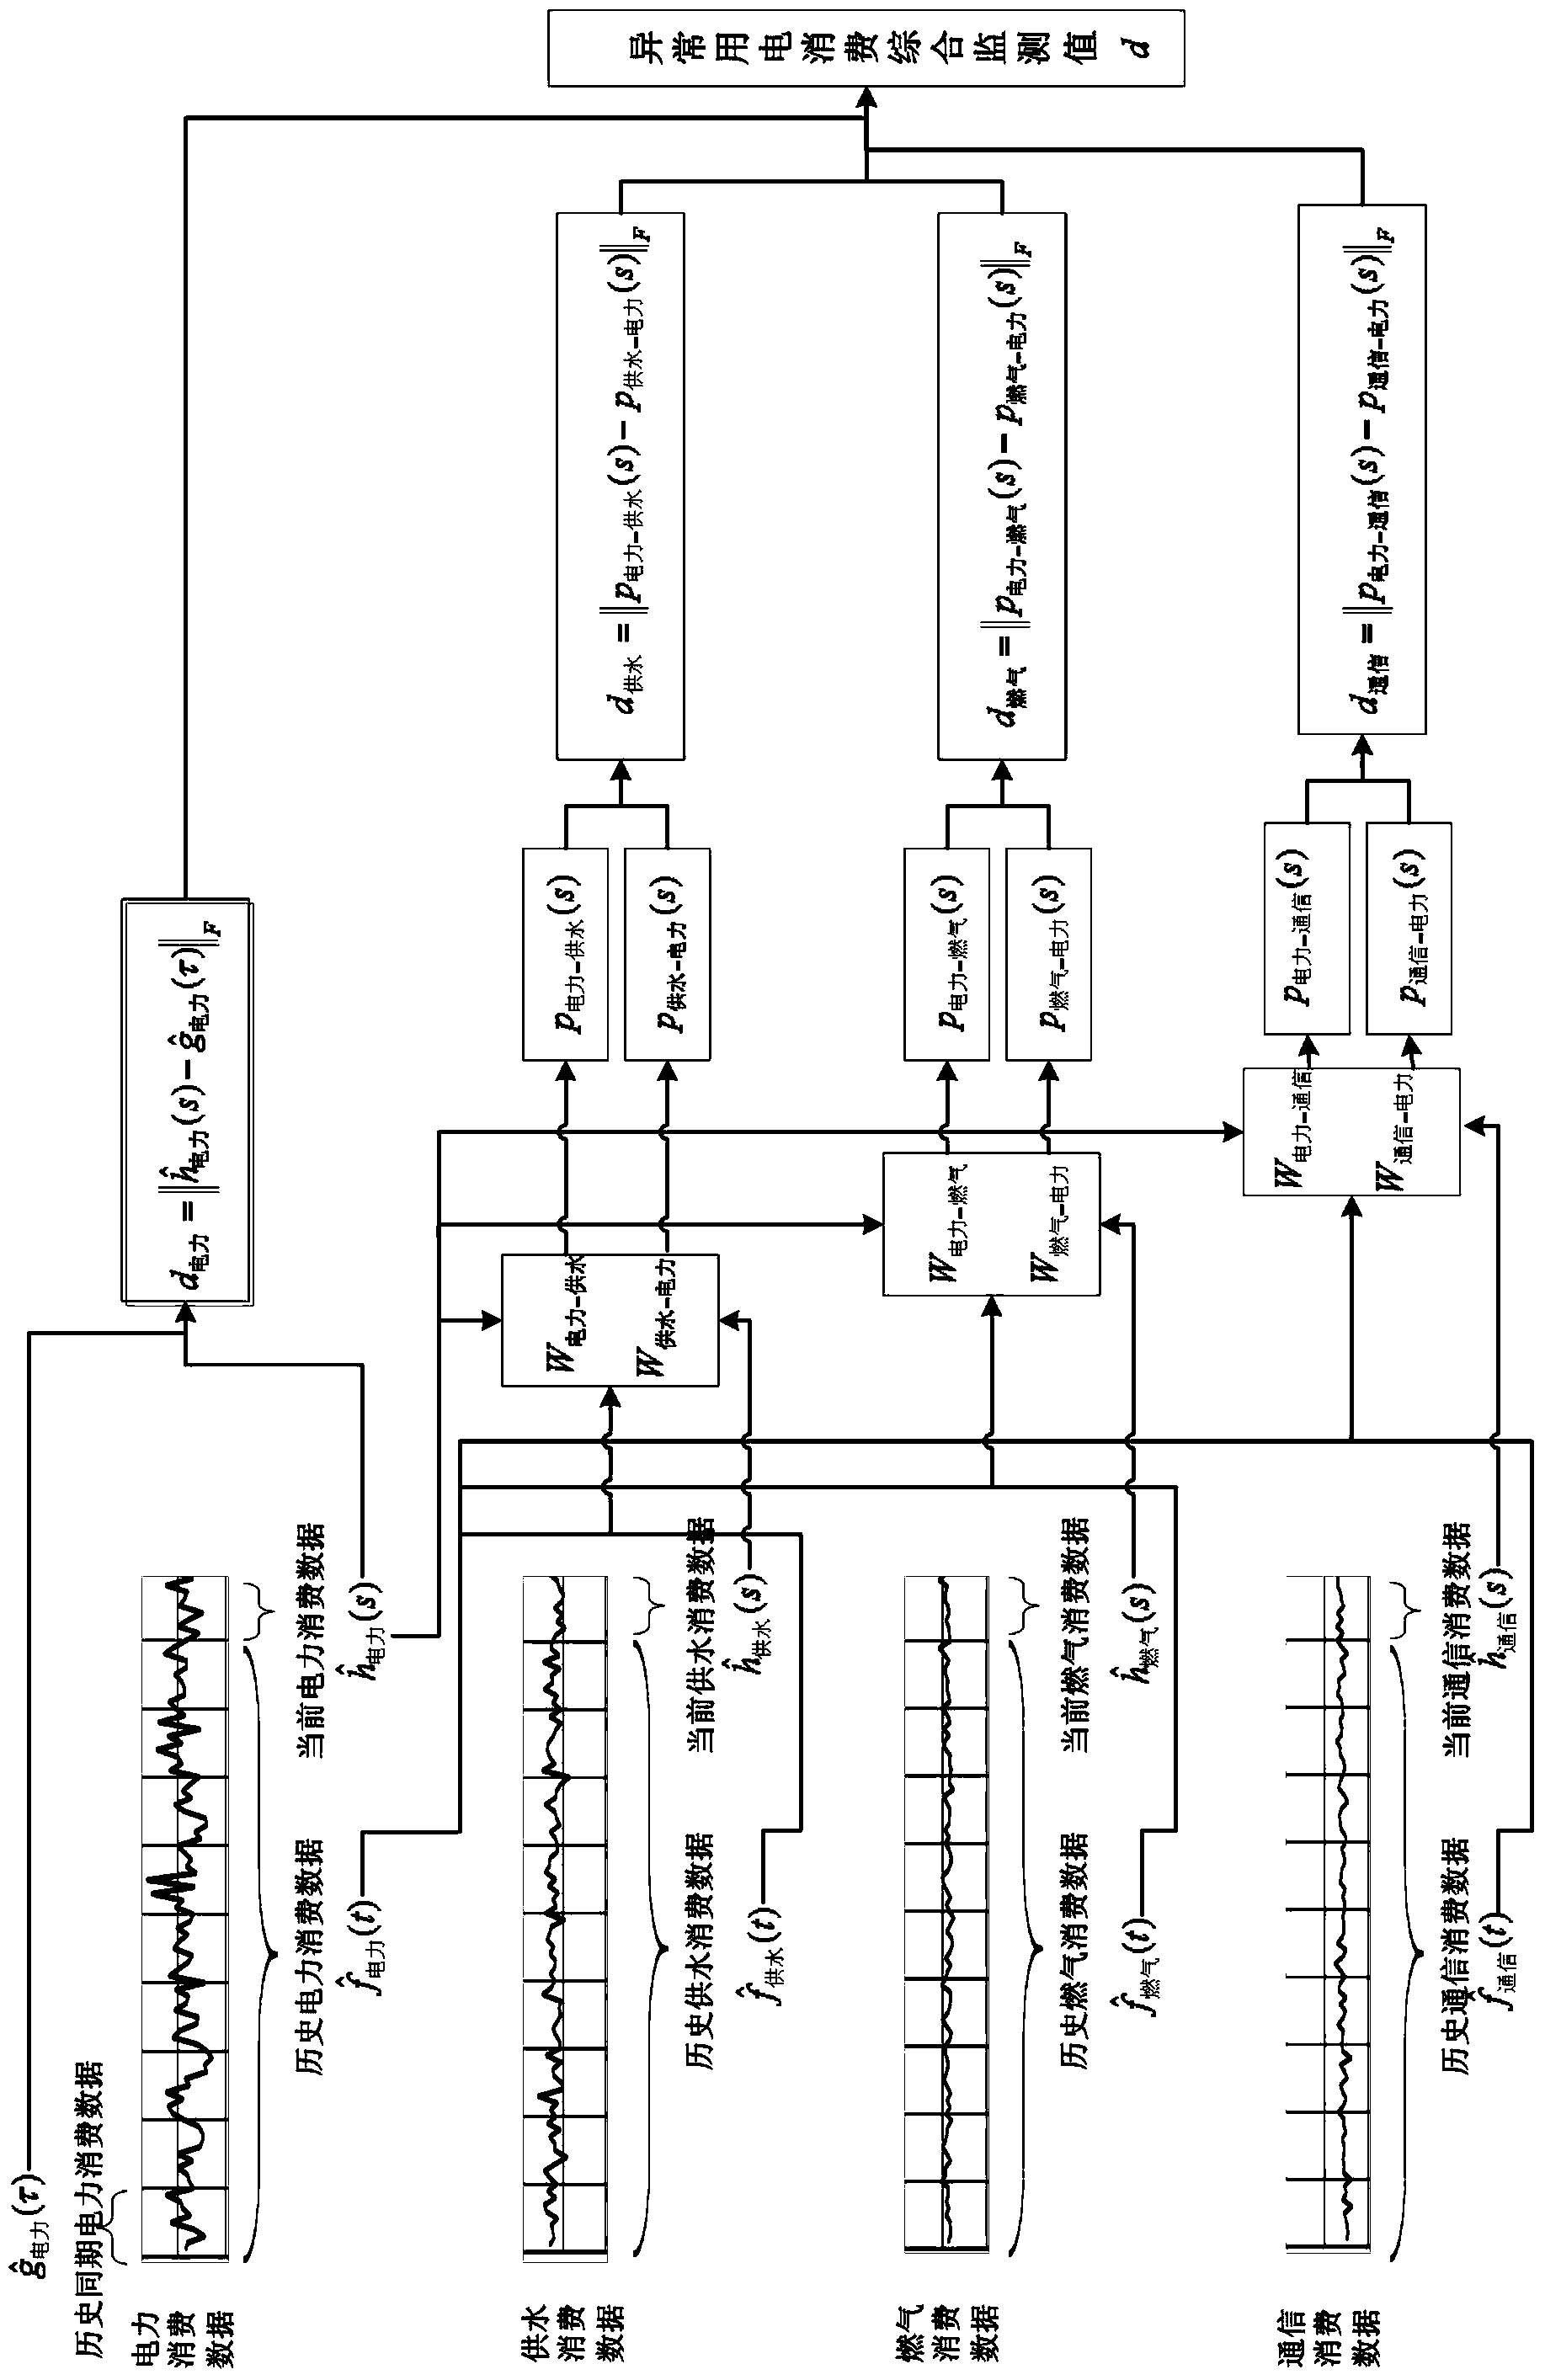 Multi-source modeling and collaborative analysis method for electricity stealing behavior